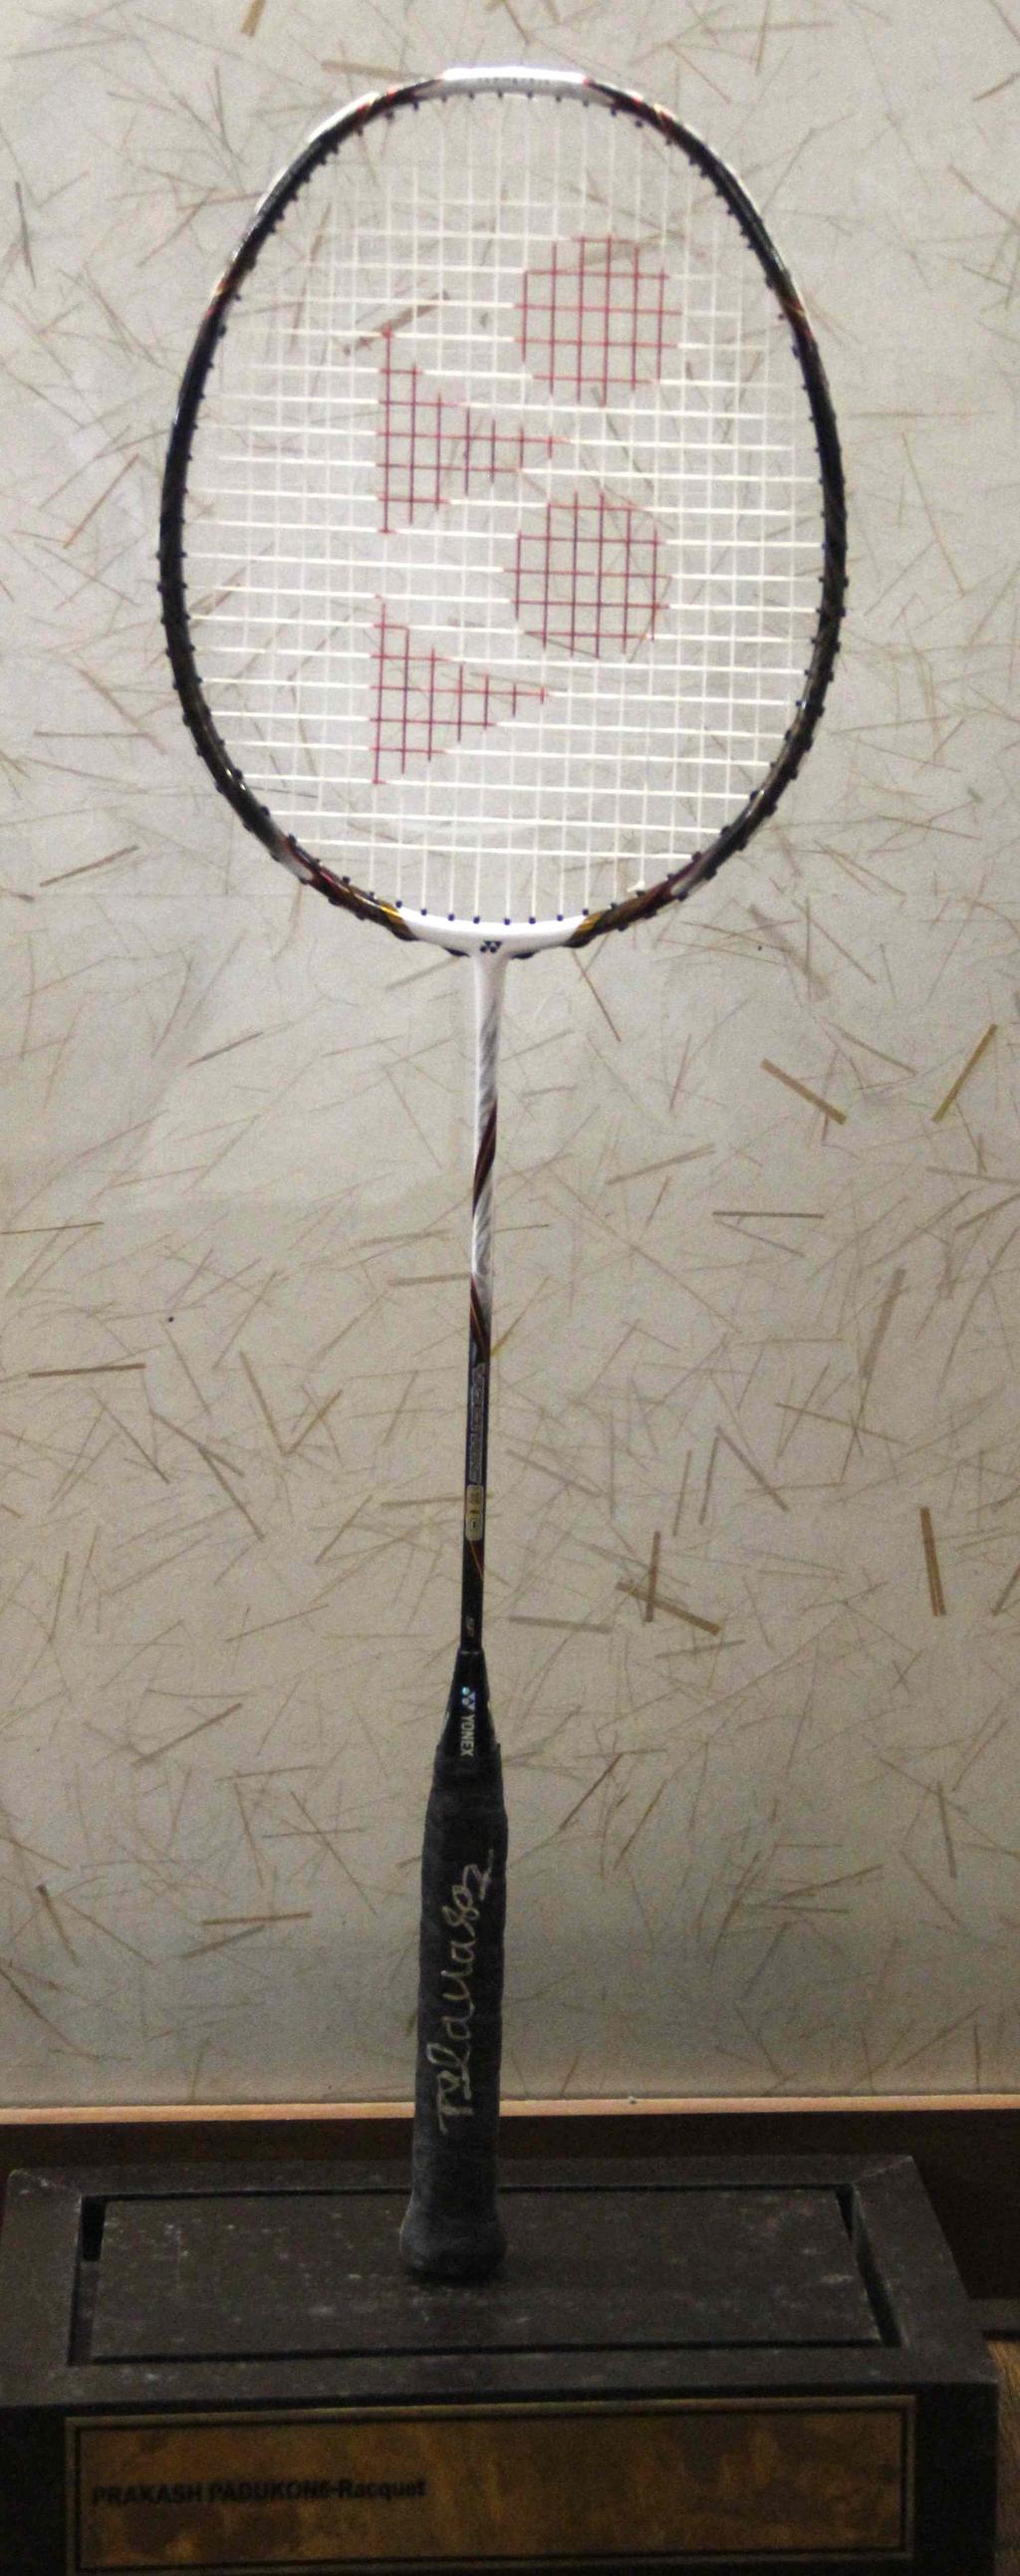 PRAKASH PADUKONE : SIGNED RACQUET Known as the Gentle Tiger on the court, Prakash Padukone was the first Indian badminton player to win the prestigious All England Badminton Championship followed by